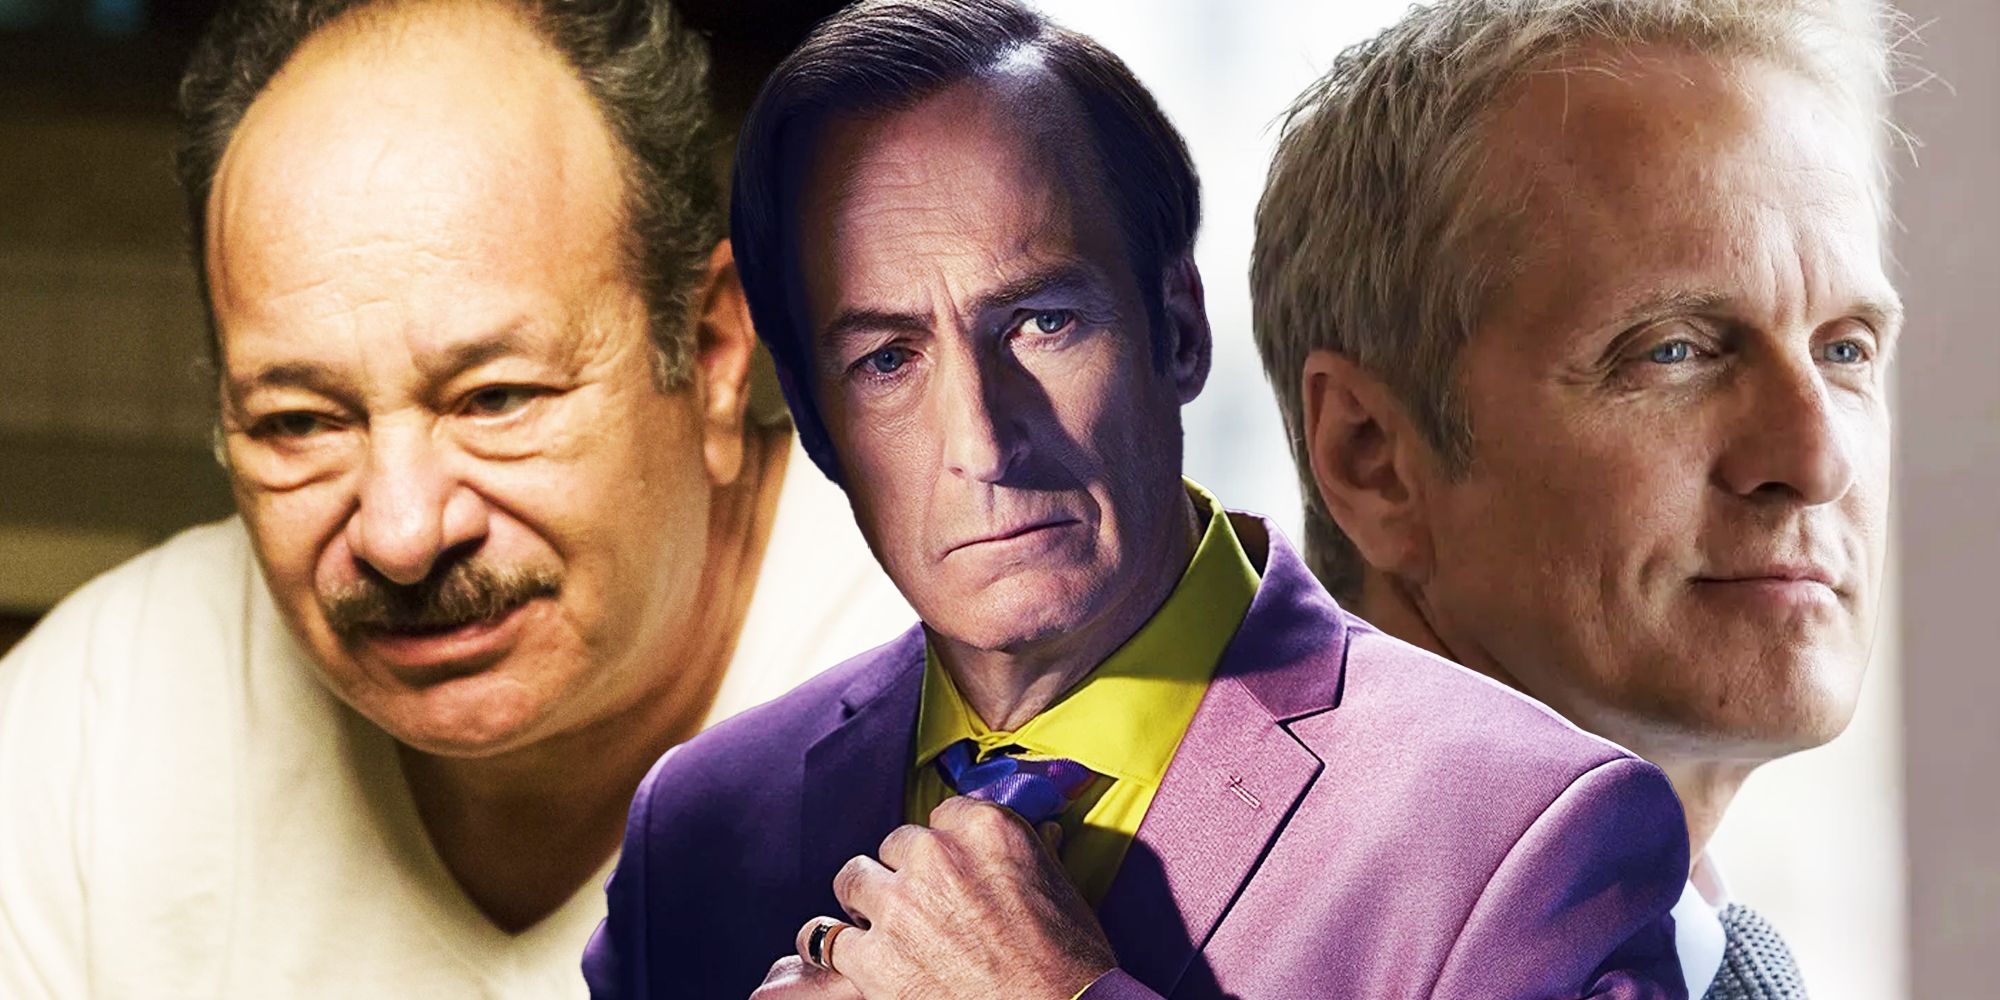 10 Innocent Better Call Saul Characters That Didn’t Deserve Their Fates